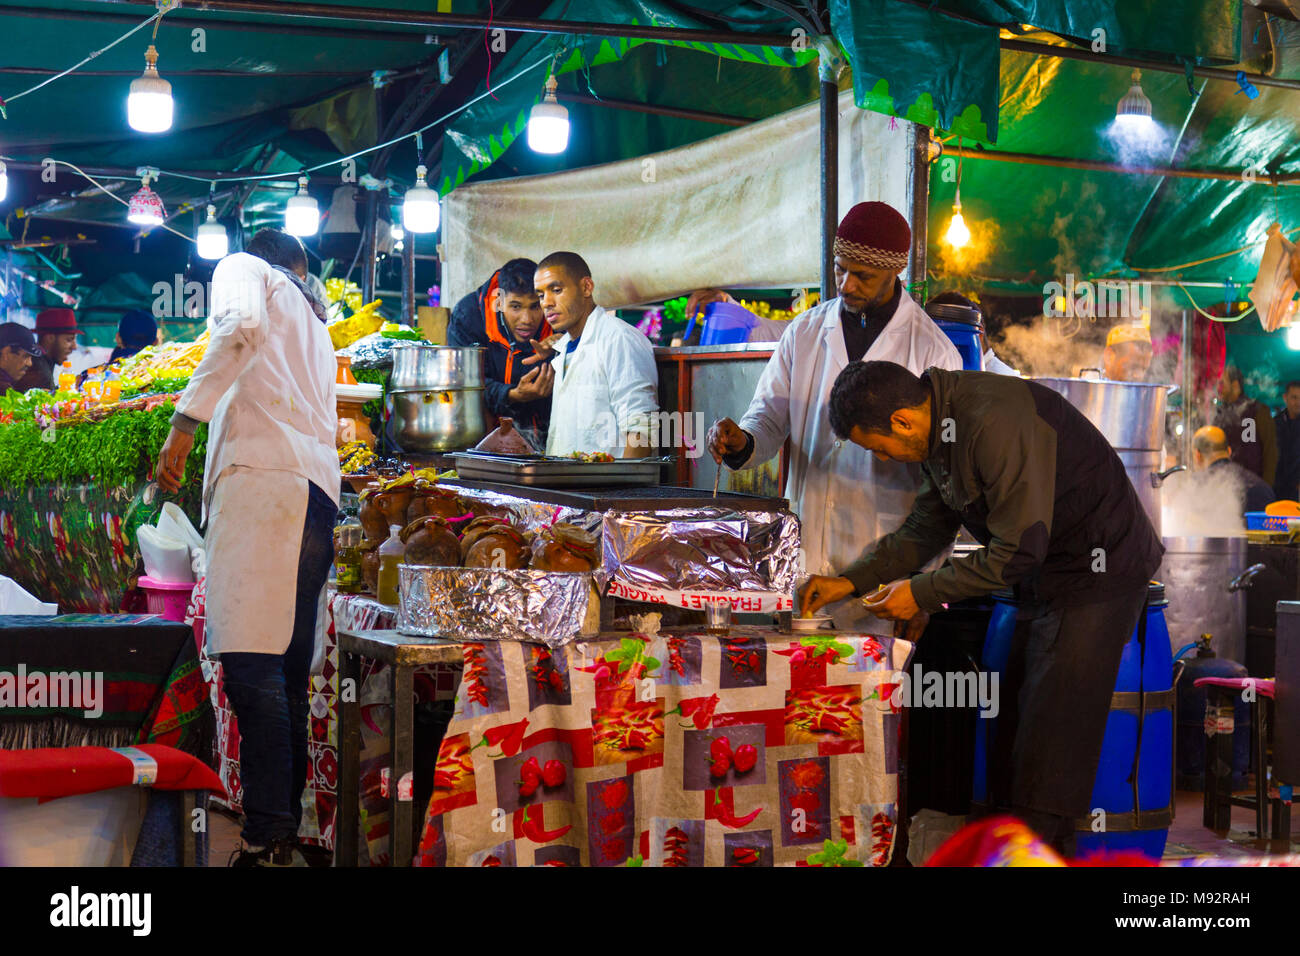 Chefs cooking at a food stall at the Djemaa el-Fna market in the Medina of Marrakesh, Morocco Stock Photo